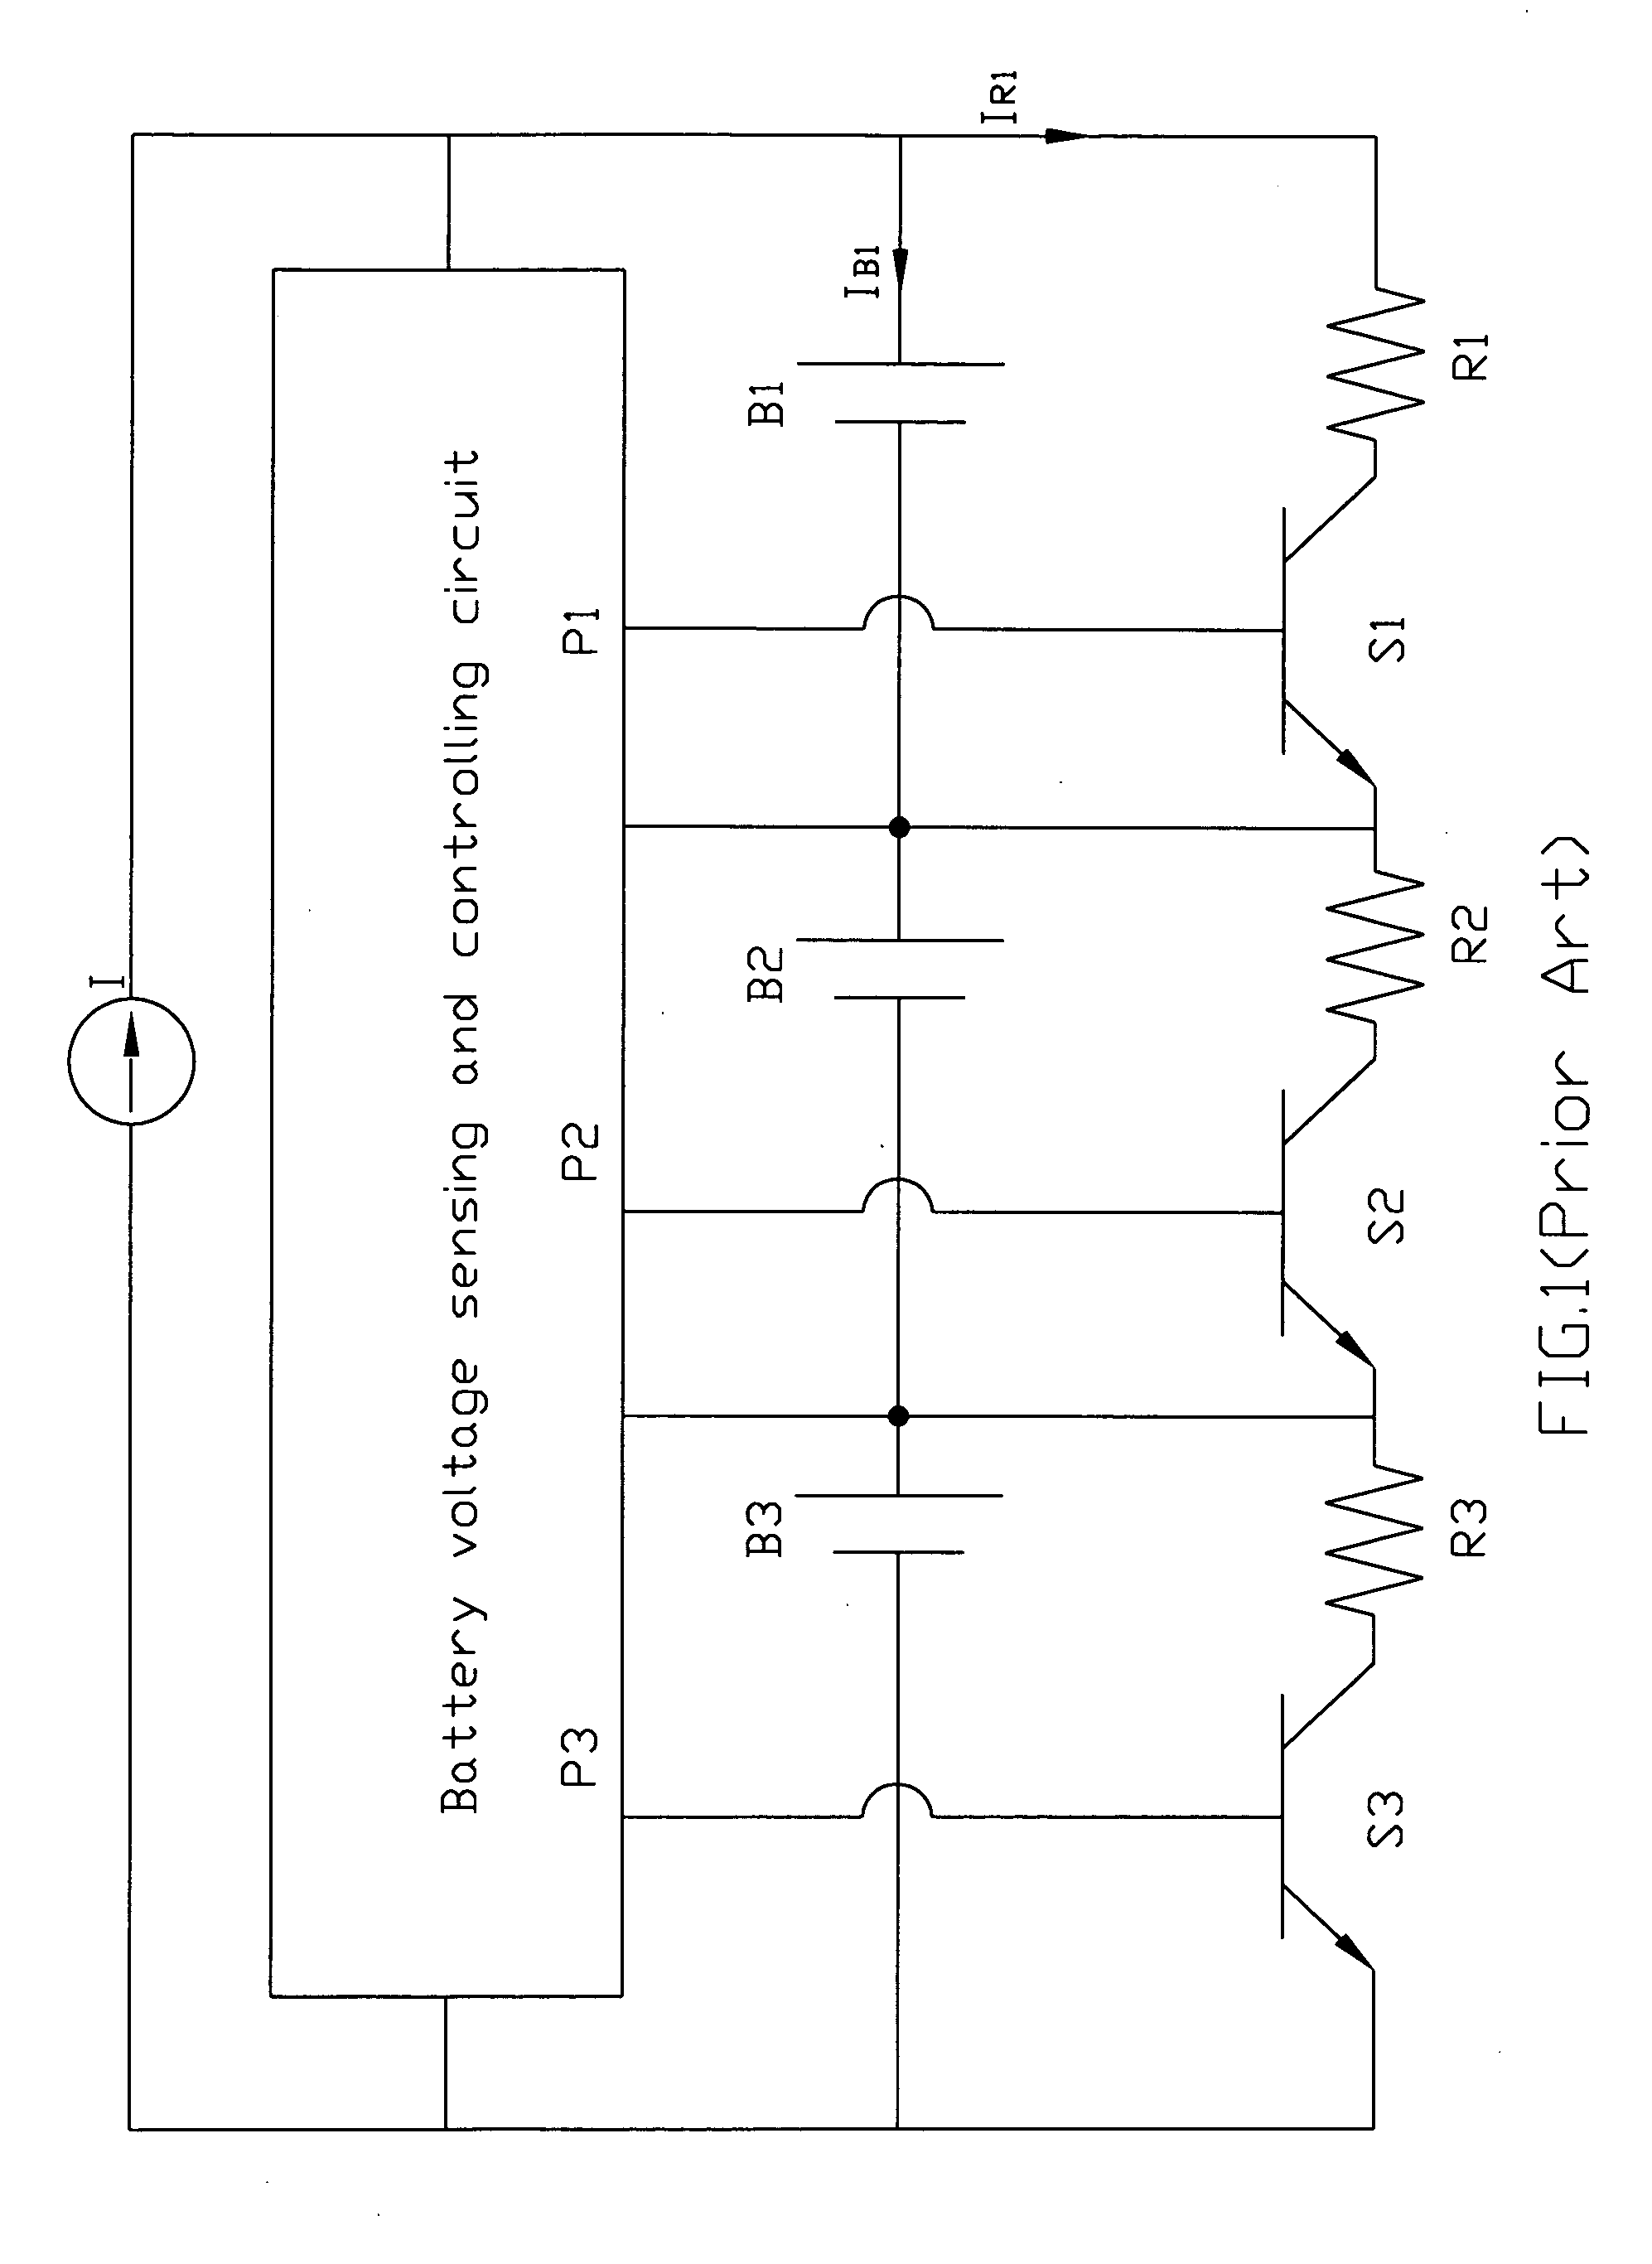 Equalizer for series of connected battery strings